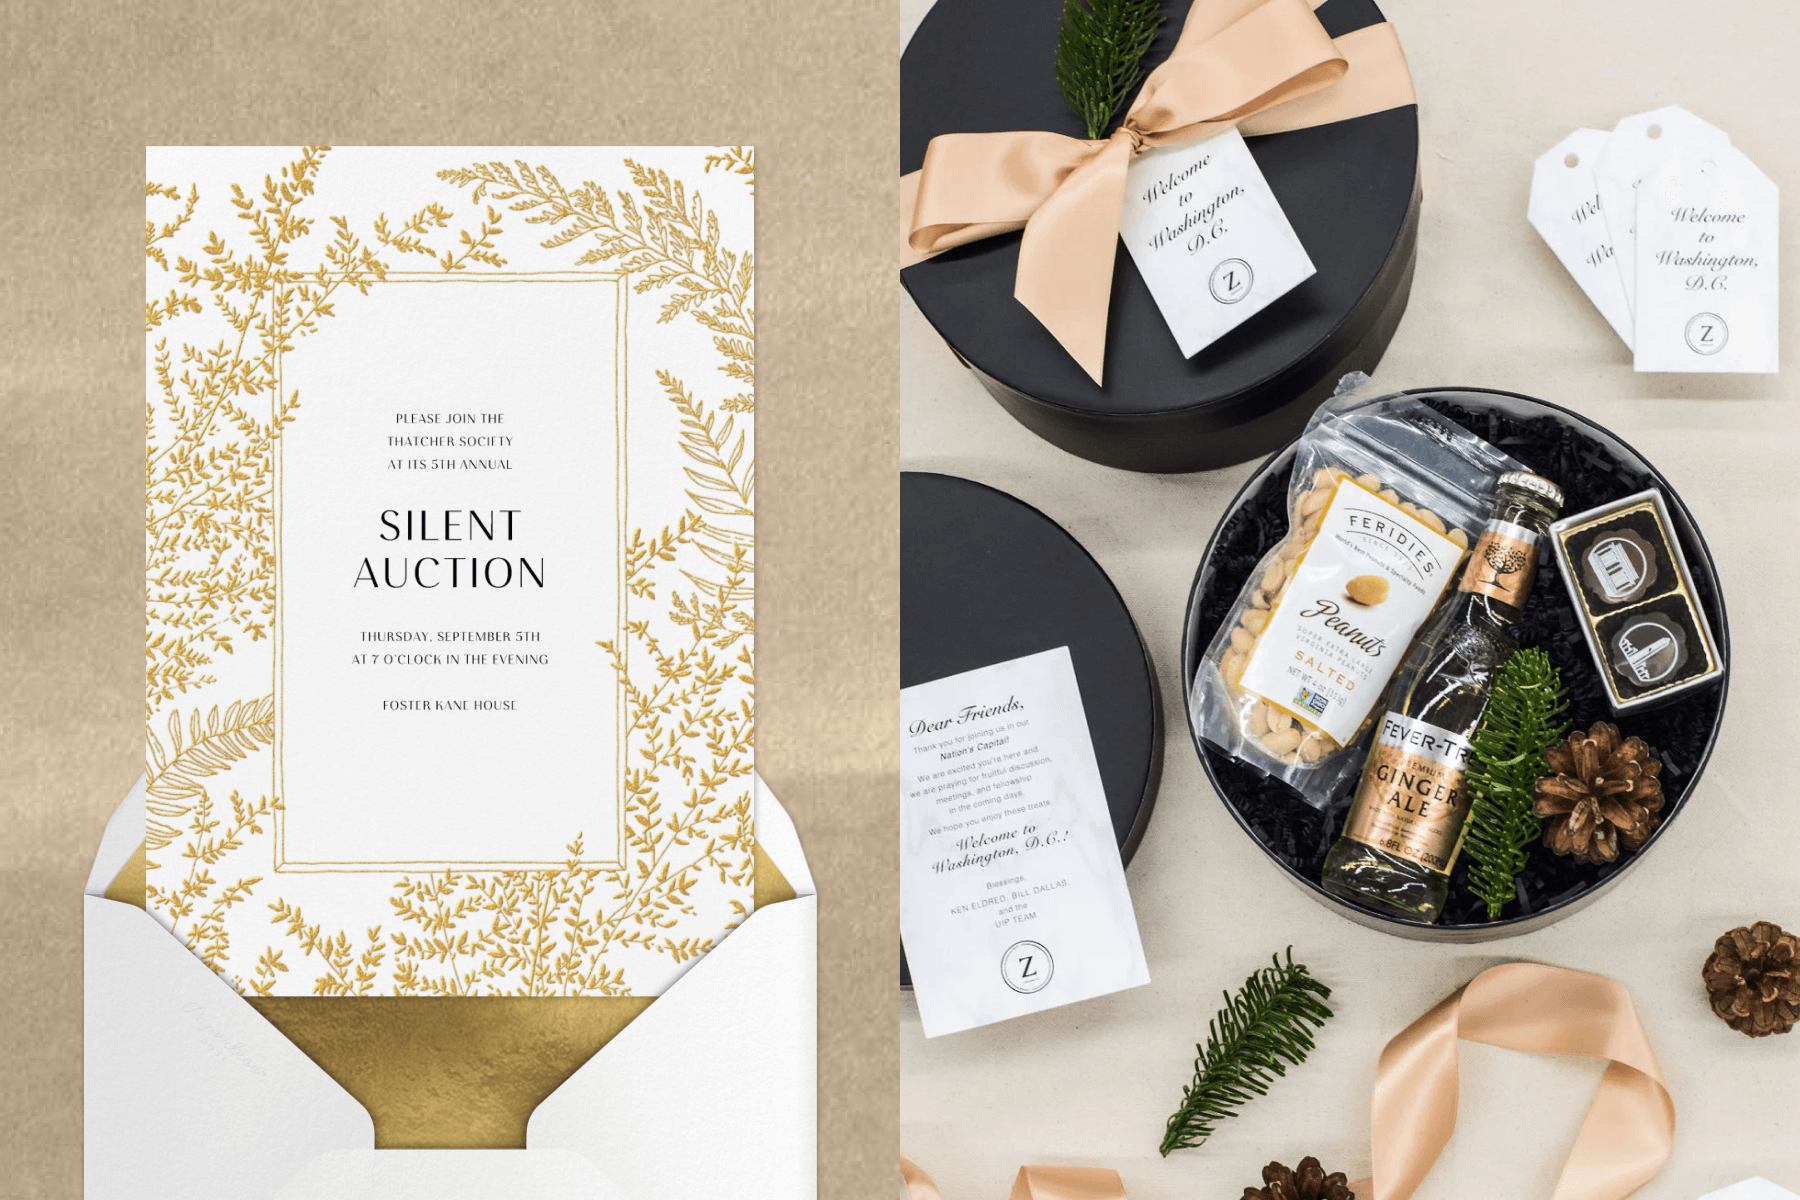 An invitation with gold ferns on the border; round gift boxes filled with peanuts, ginger ale, and a pine cone.